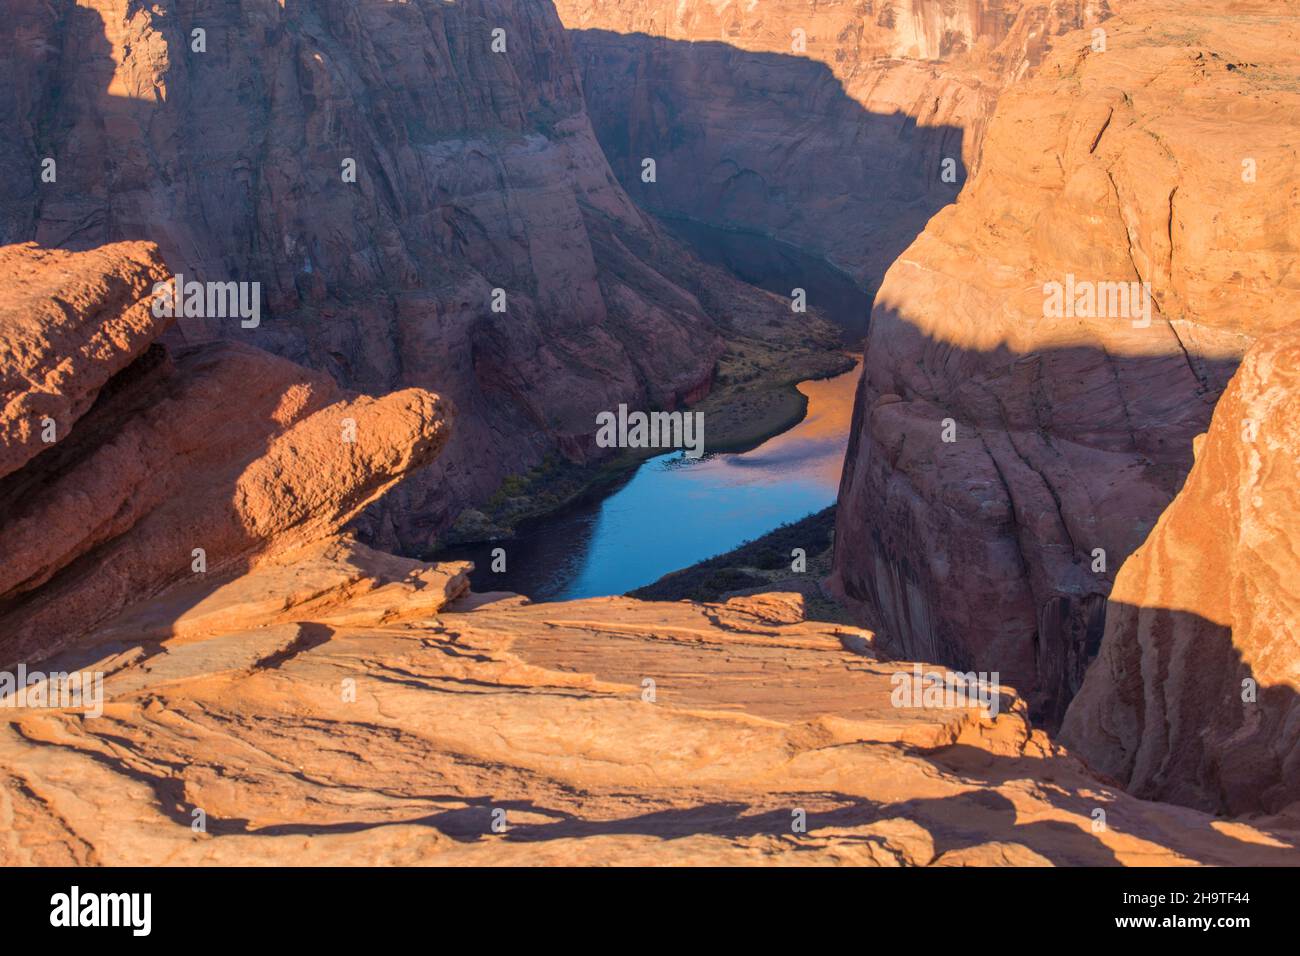 Glen Canyon National Recreation Area, Page, Arizona, USA. View from clifftop over the tranquil Colorado River at Horseshoe Bend, sunrise. Stock Photo